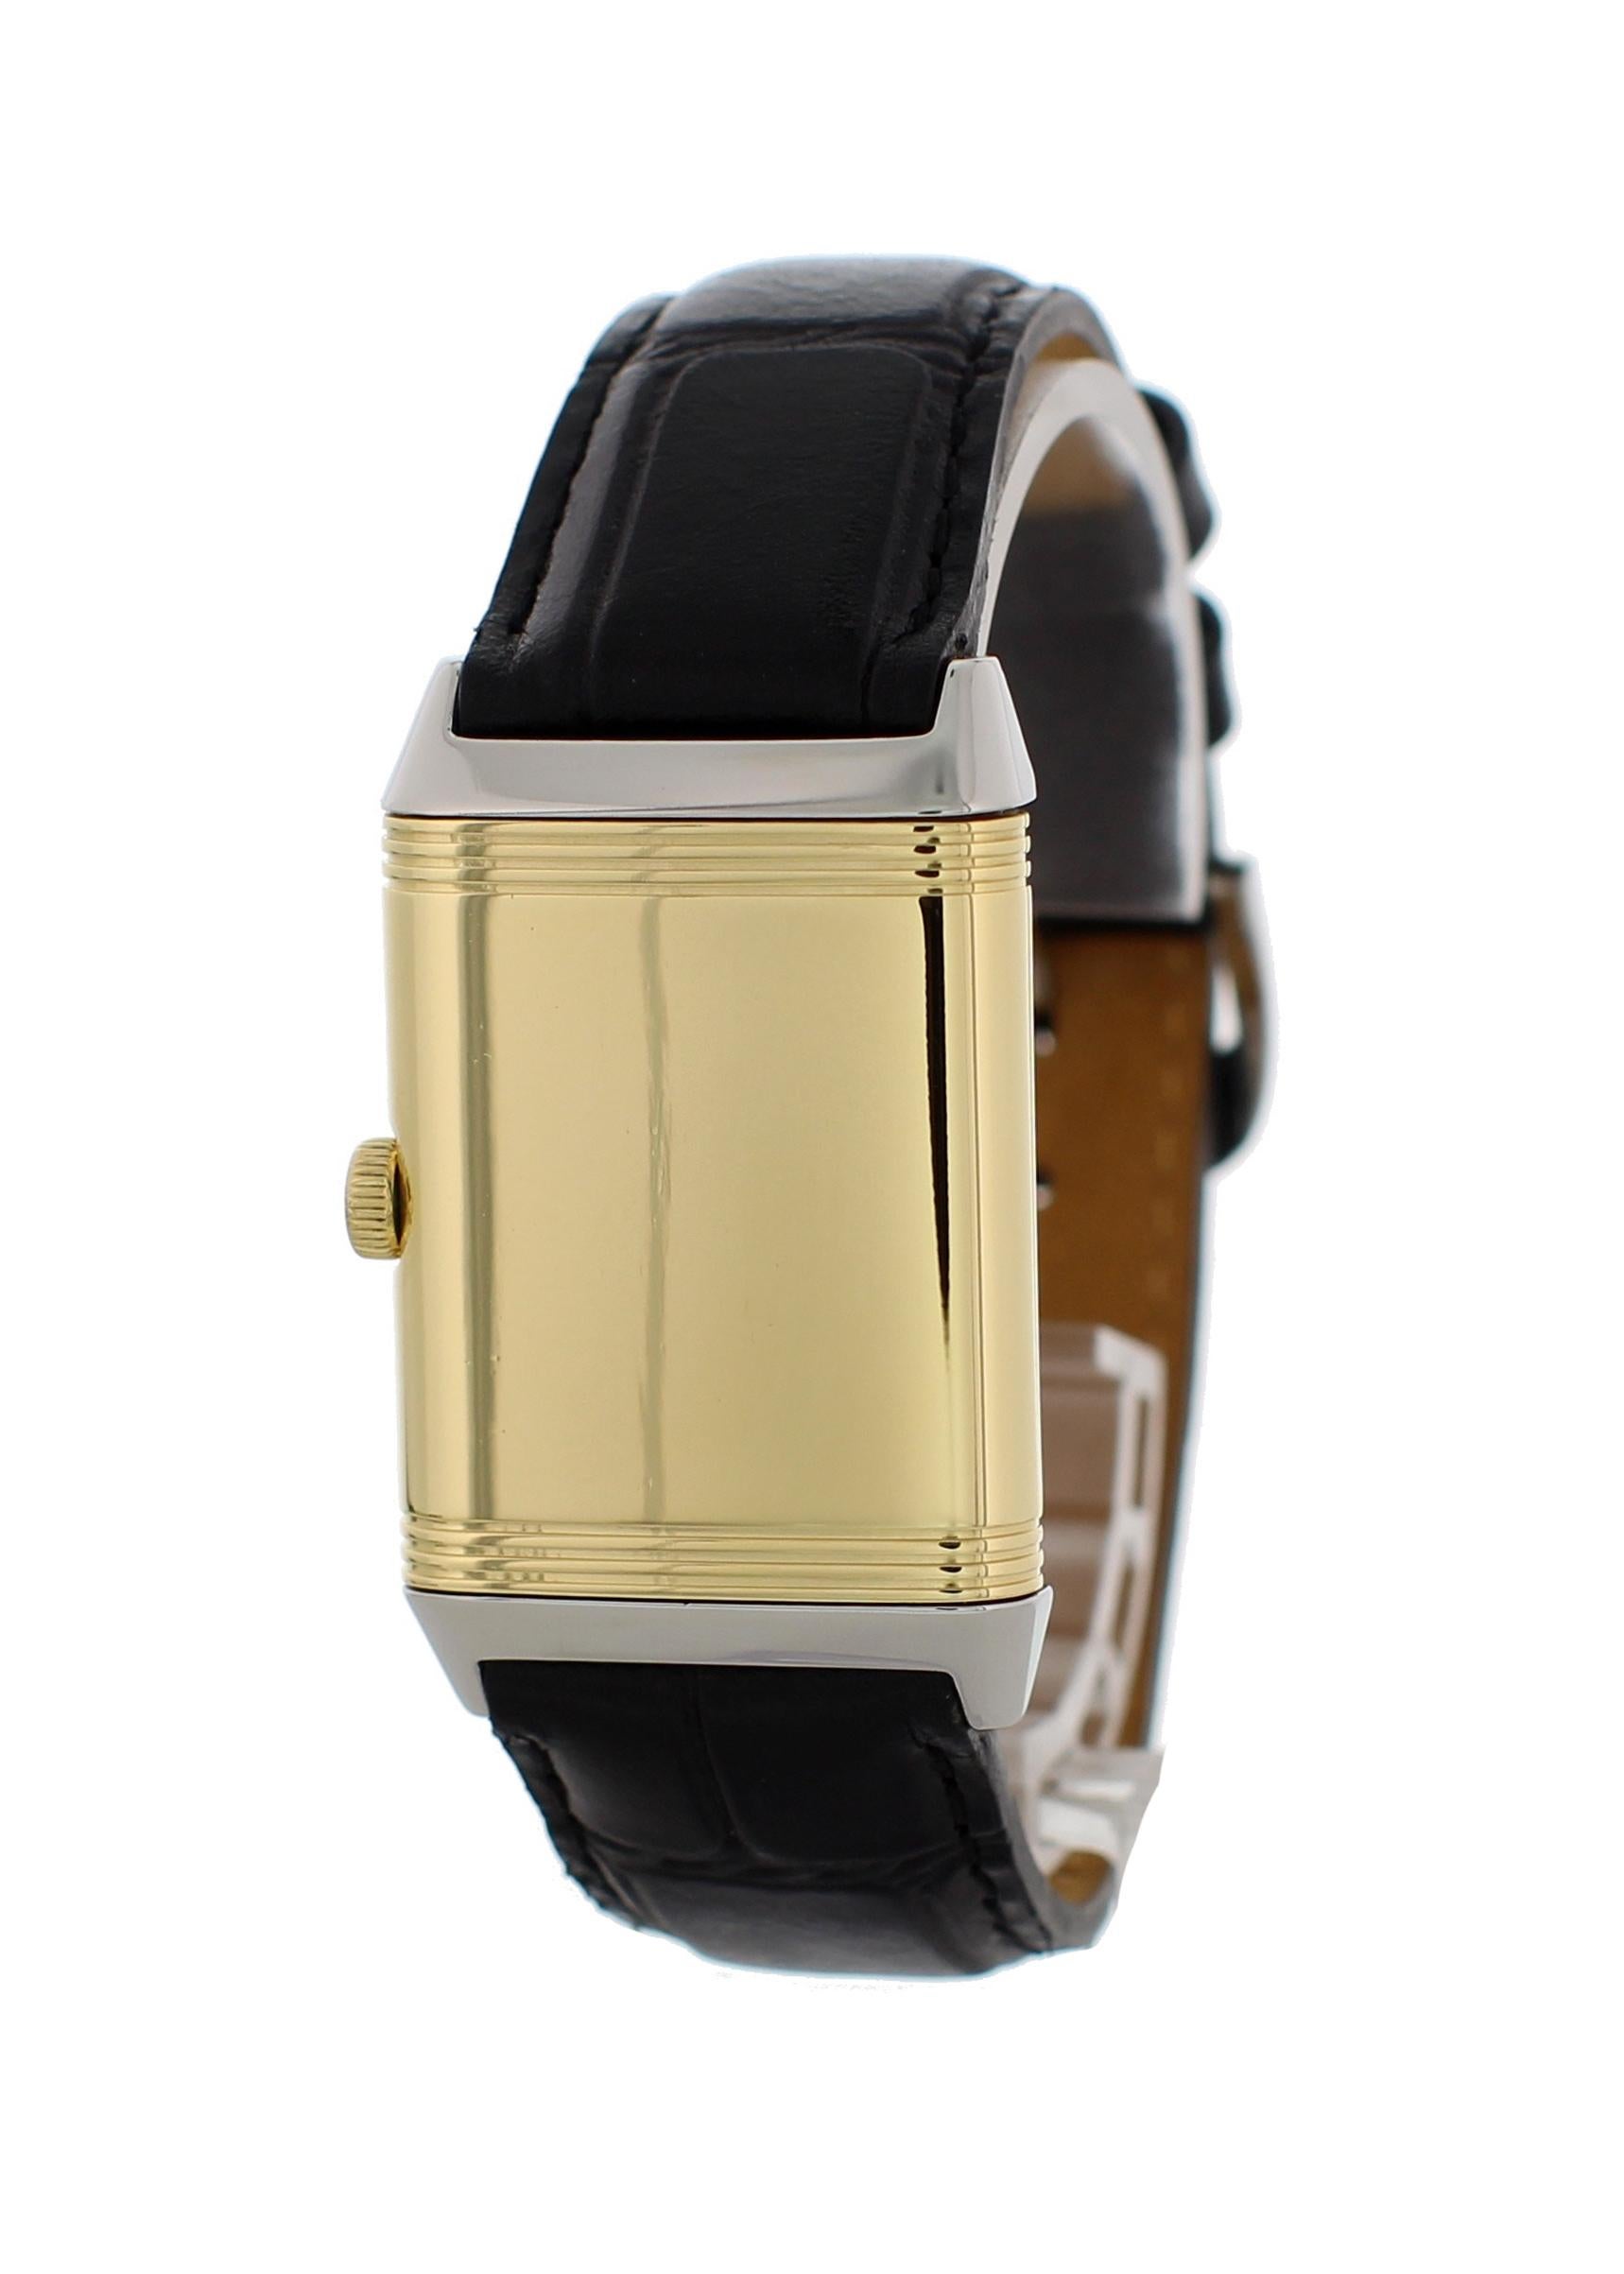 Jaeger-Le Coultre Reverso Classic Mens Watch. 26 mm stainless steel rectangular case with reeded ends rotating within its back plate.  Silver dial with blue steel hands and Arabic numeral hour markers. Minute markers around an inner ring. Black